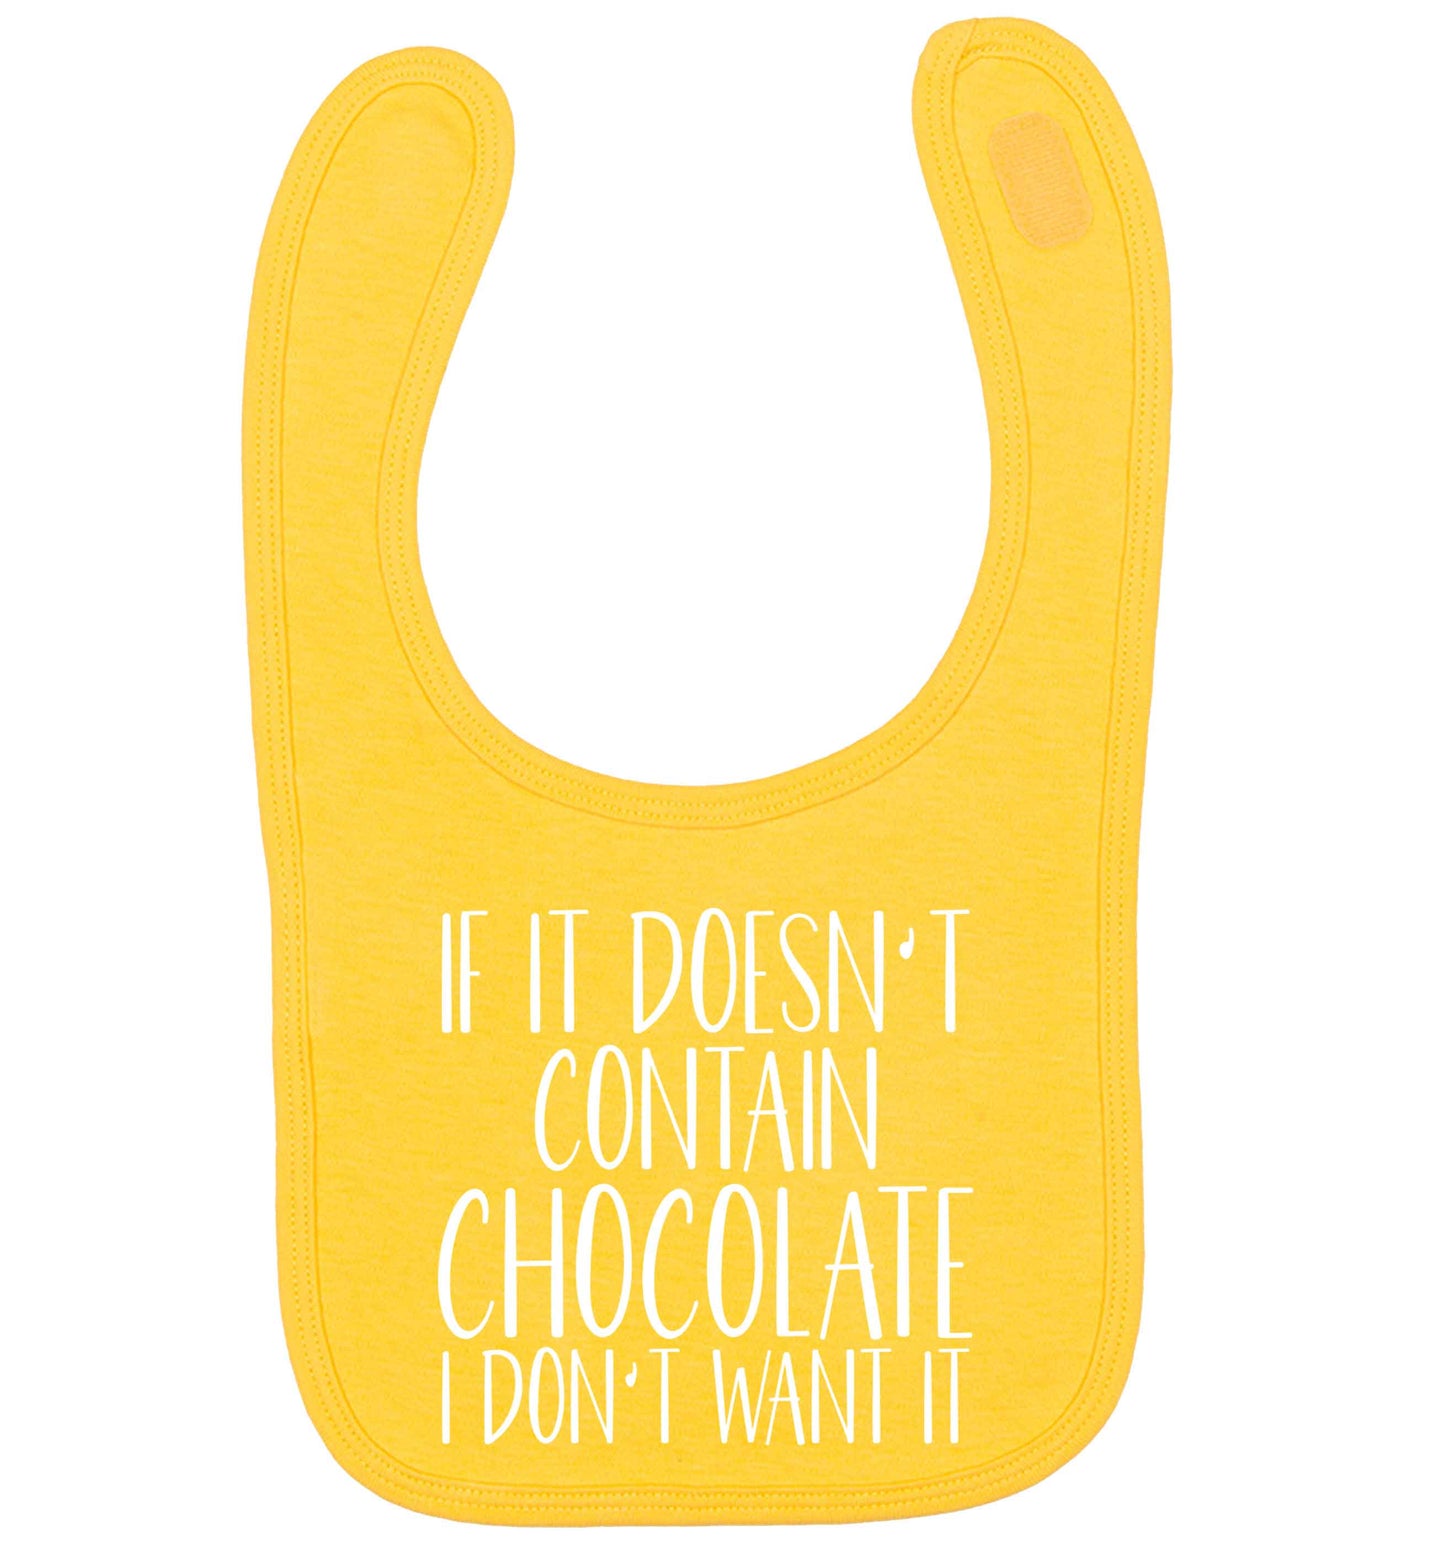 If it doesn't contain chocolate I don't want it yellow baby bib